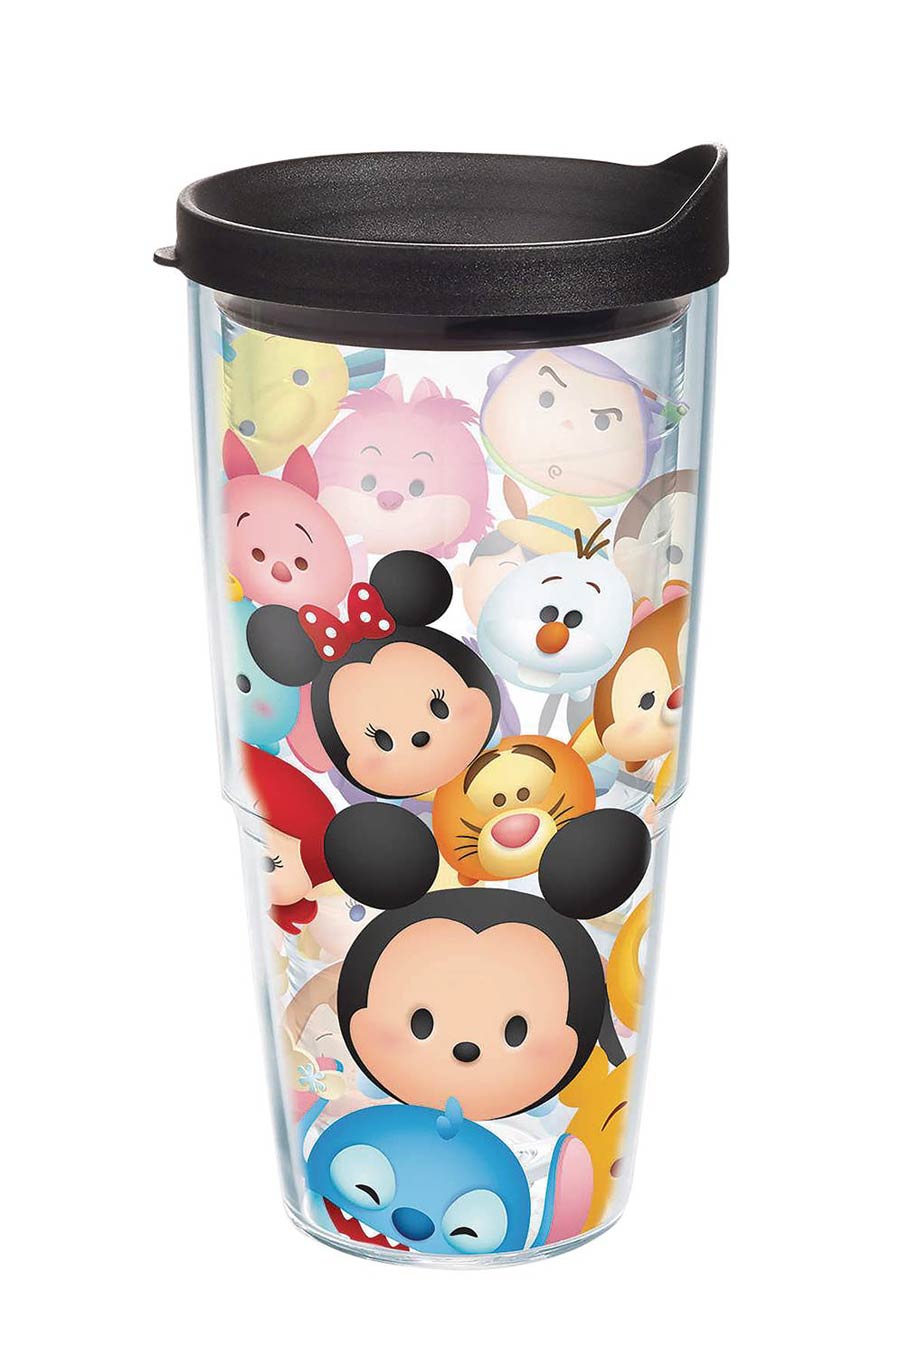 Tervis Disney Tsum-Tsum Stack Tumbler With Lid - 24-Ounce